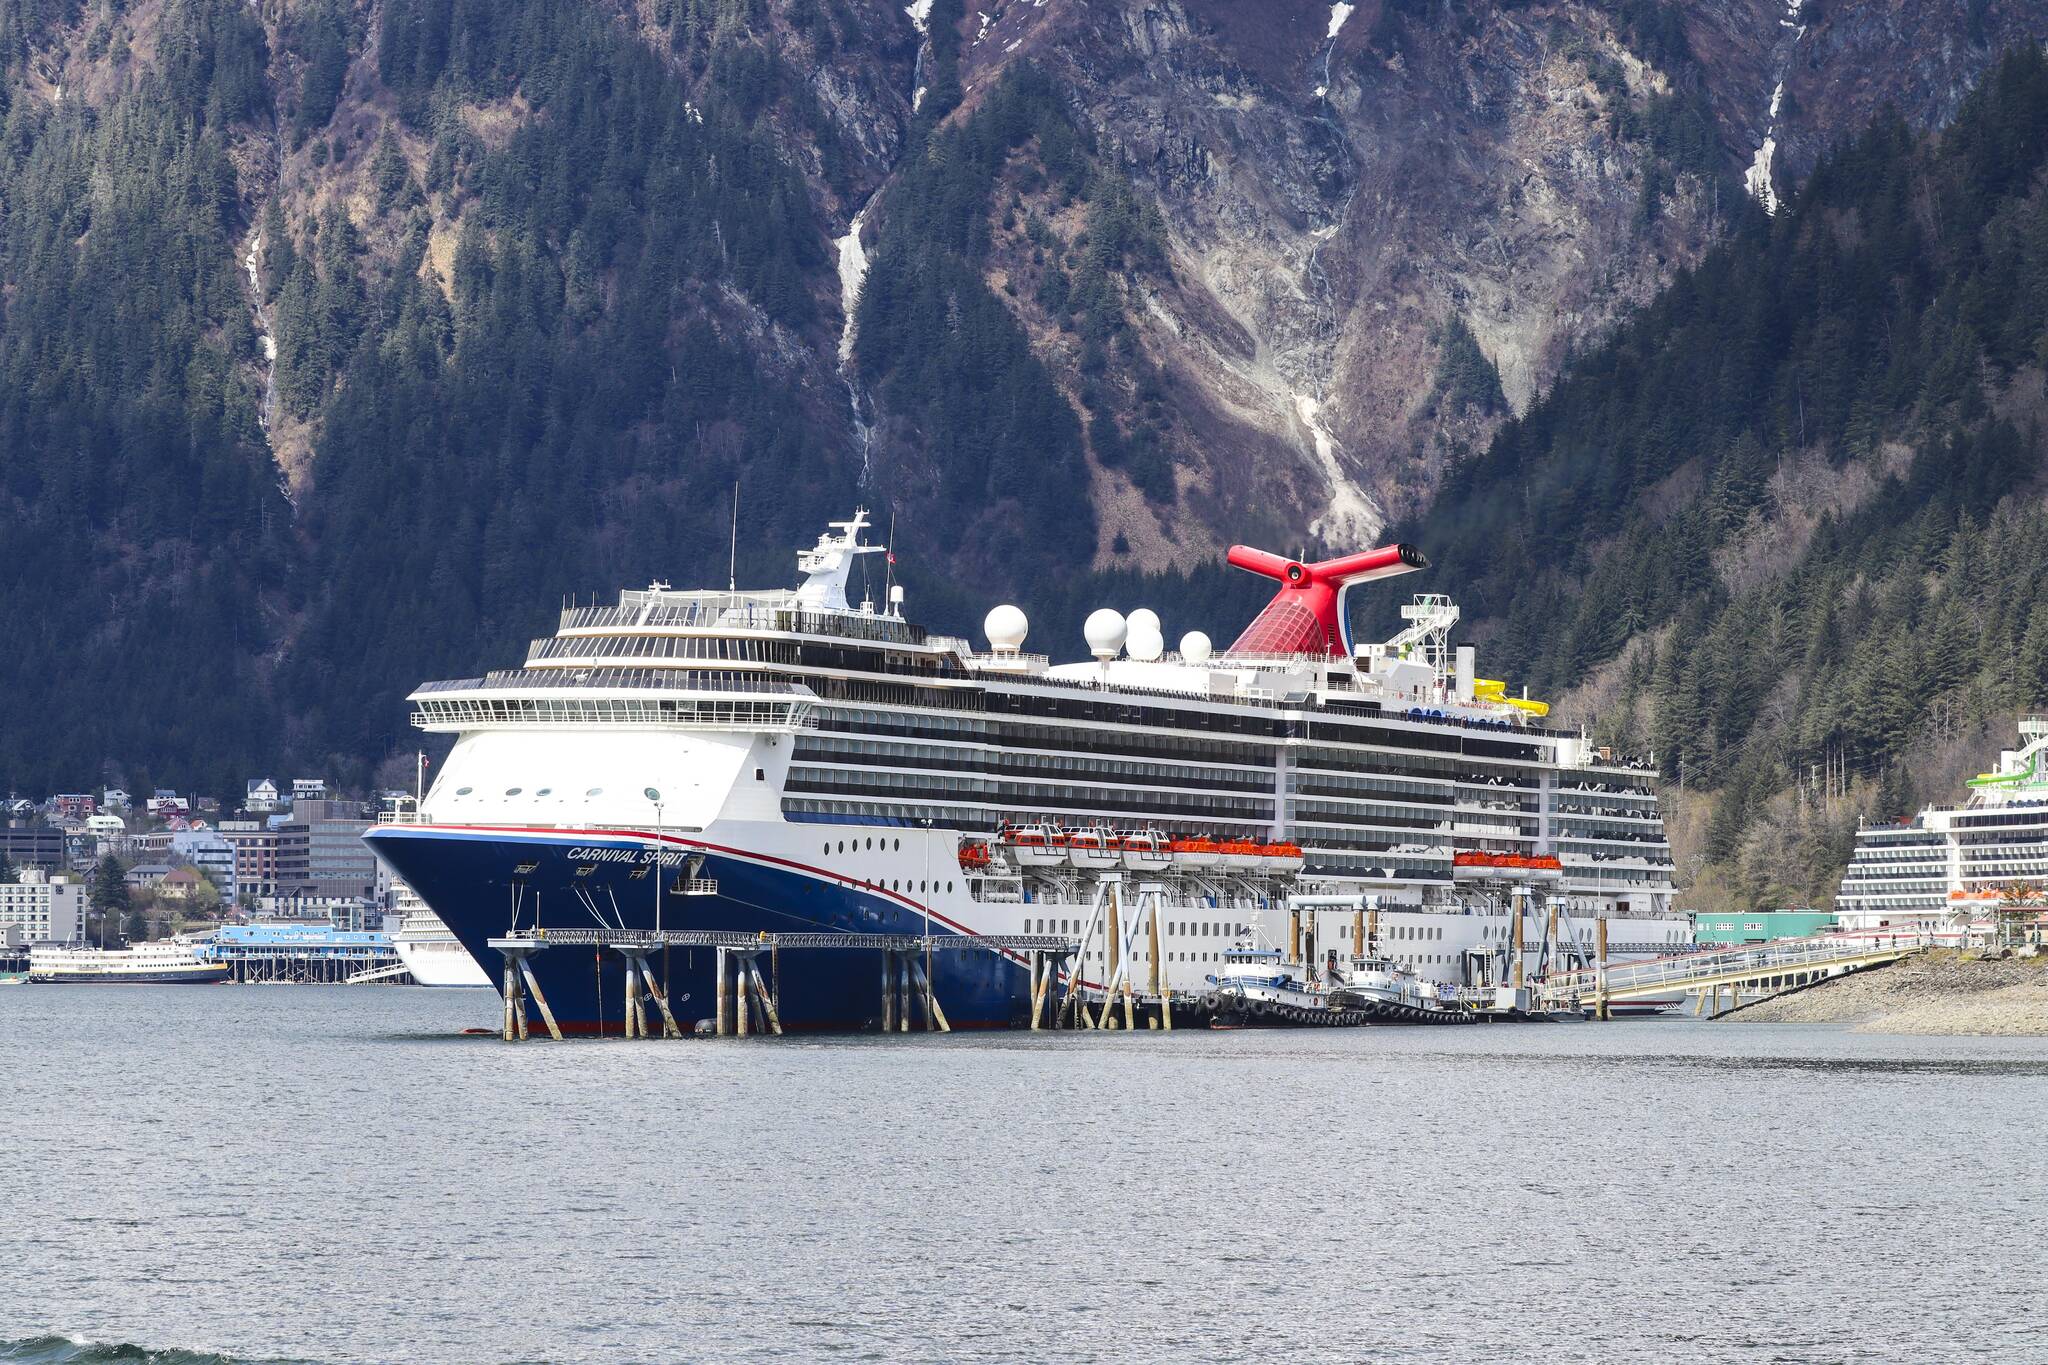 A Carnival cruise ship is berthed Juneau’s cruise ship docks during the summer of 2022. (Michael S. Lockett / Juneau Empire FIle)